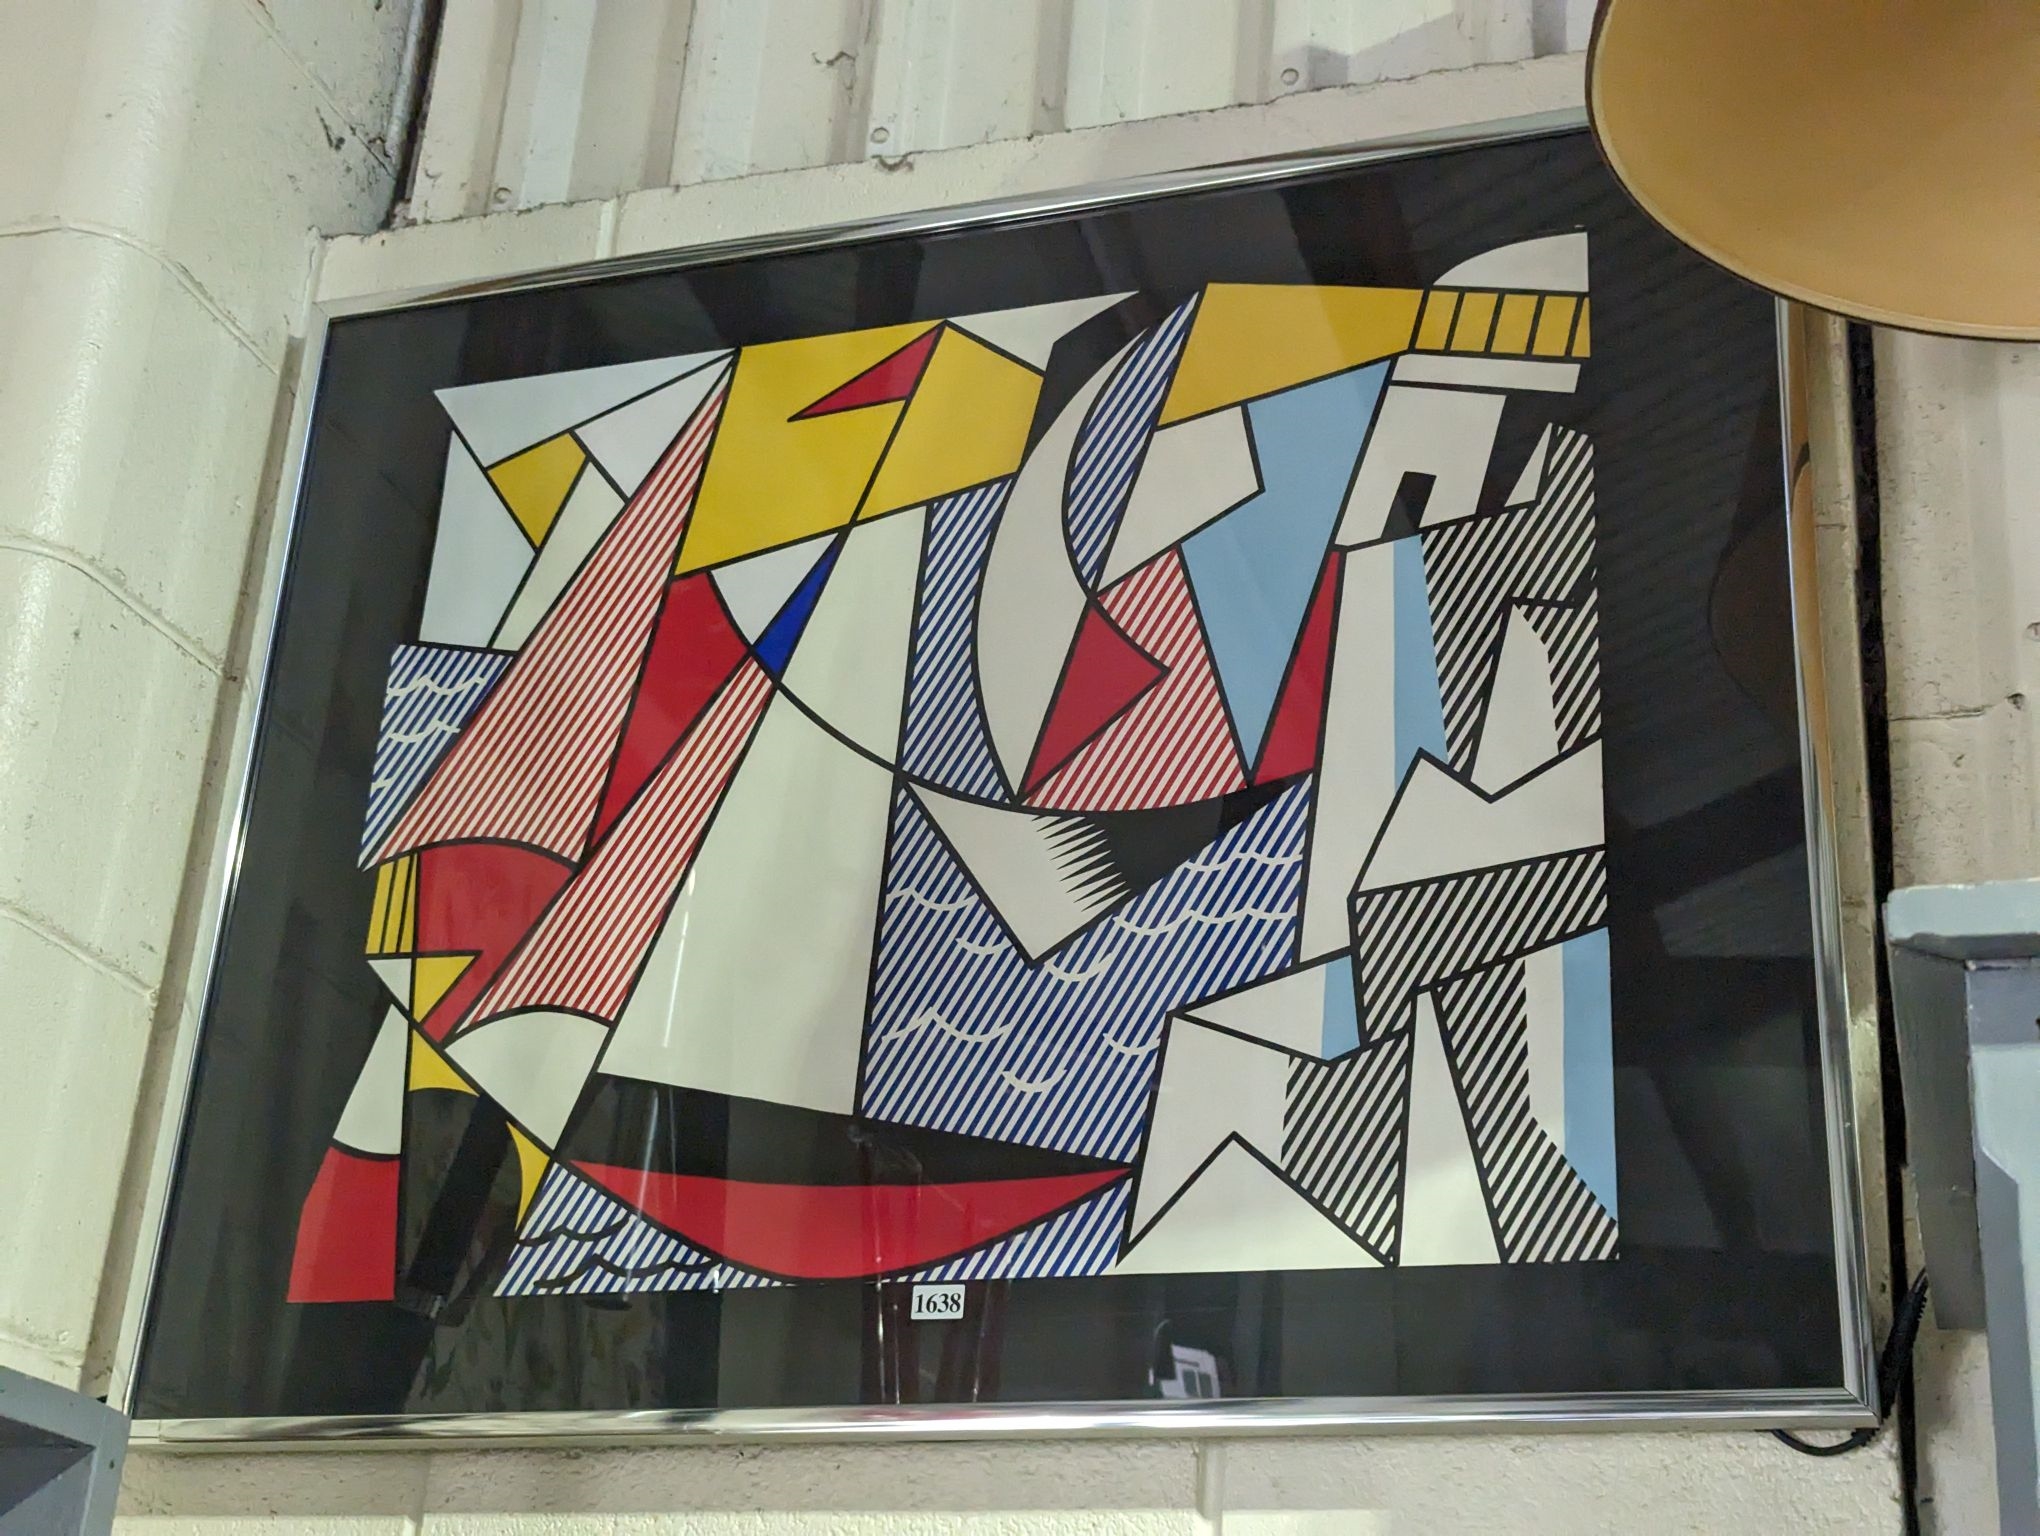 Artwork by Roy Lichtenstein, Sailboats, Made of lithograph print